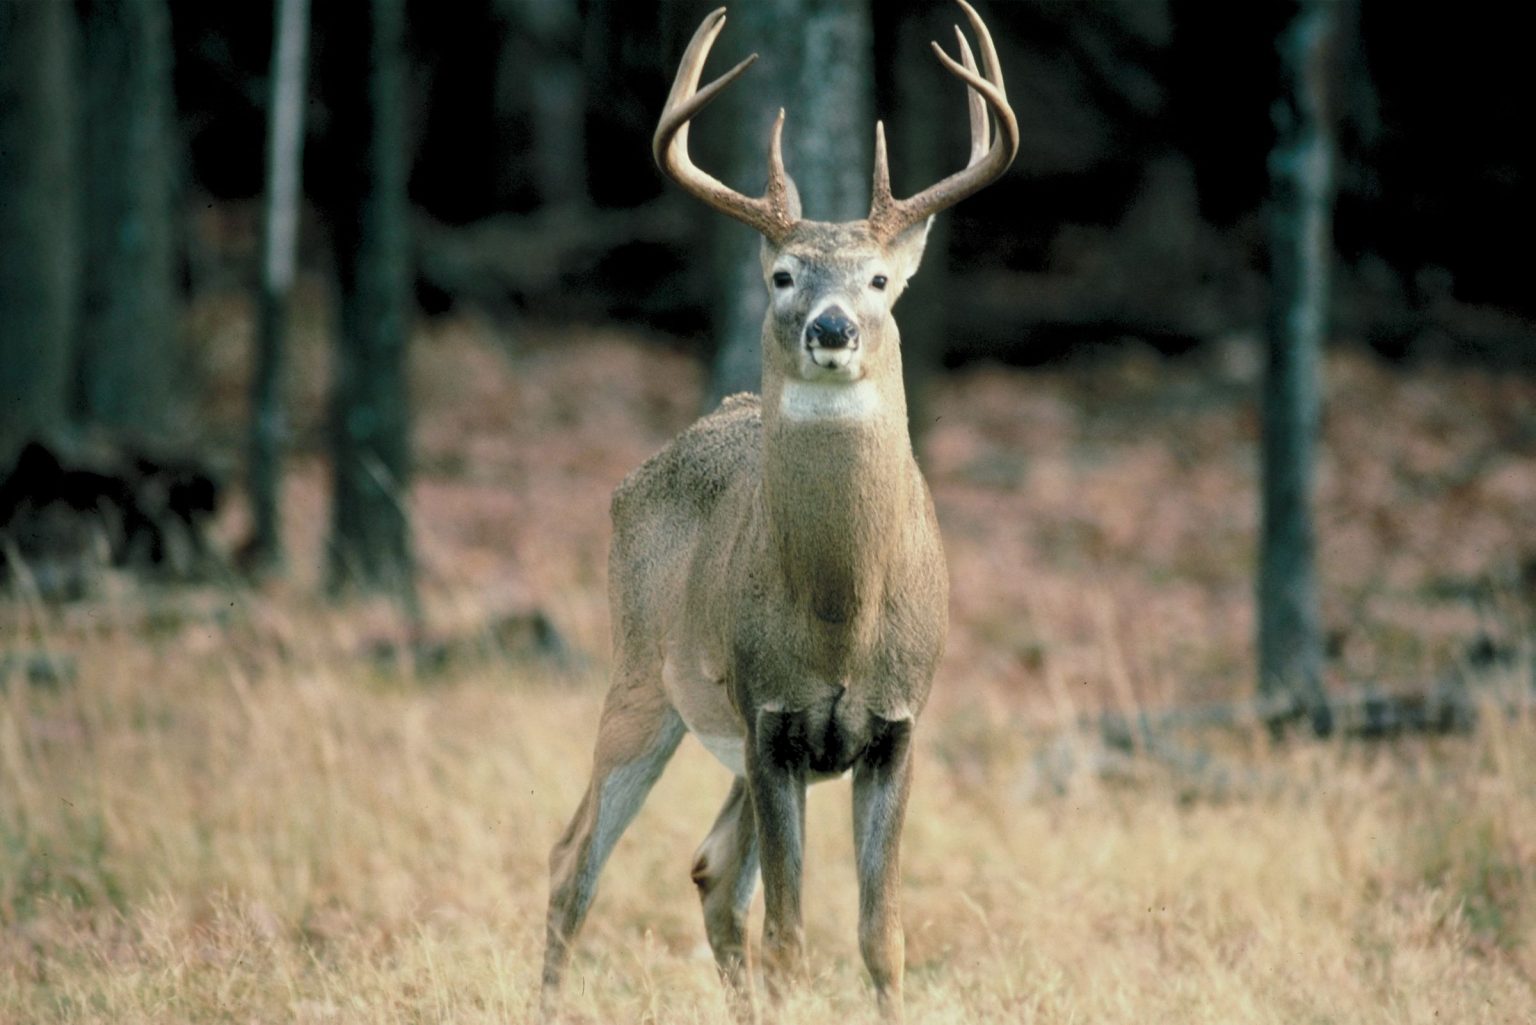 A male deer, with antlers, seen from a slight distance. The buck is facing the camera and looking directly into the lens.